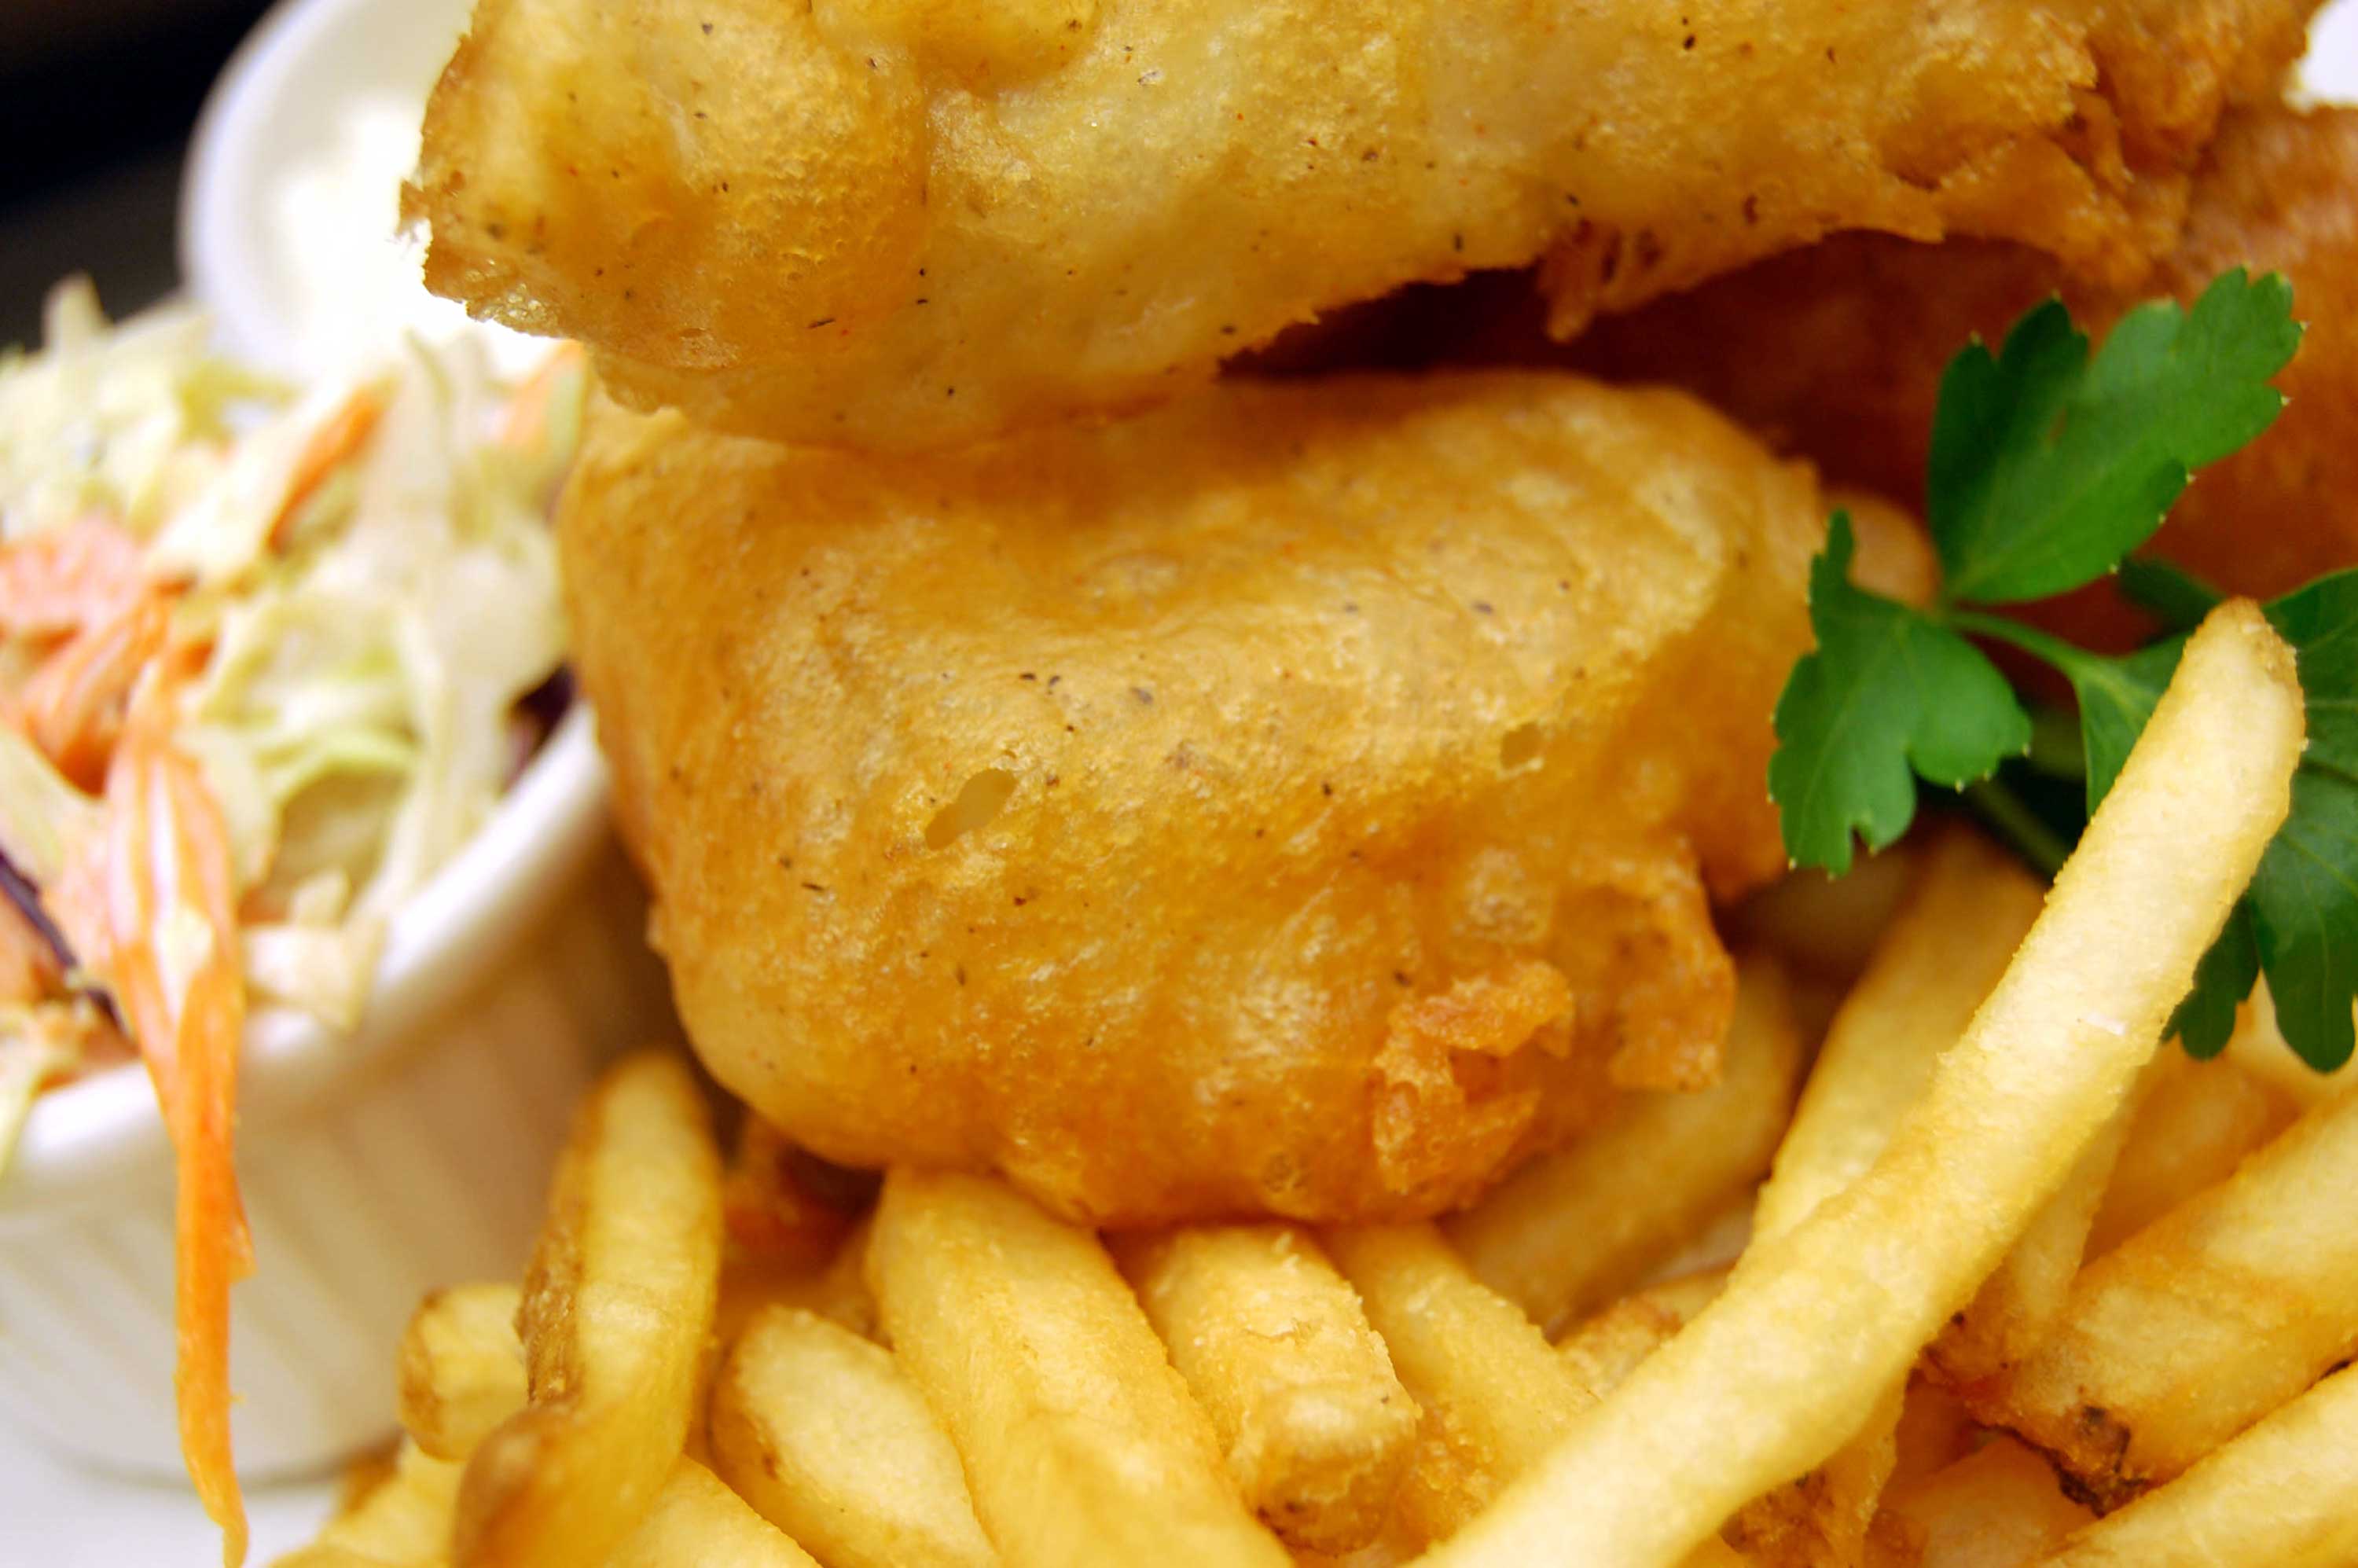 Friday Fish Fry at Quail Valley for Fish and Chips